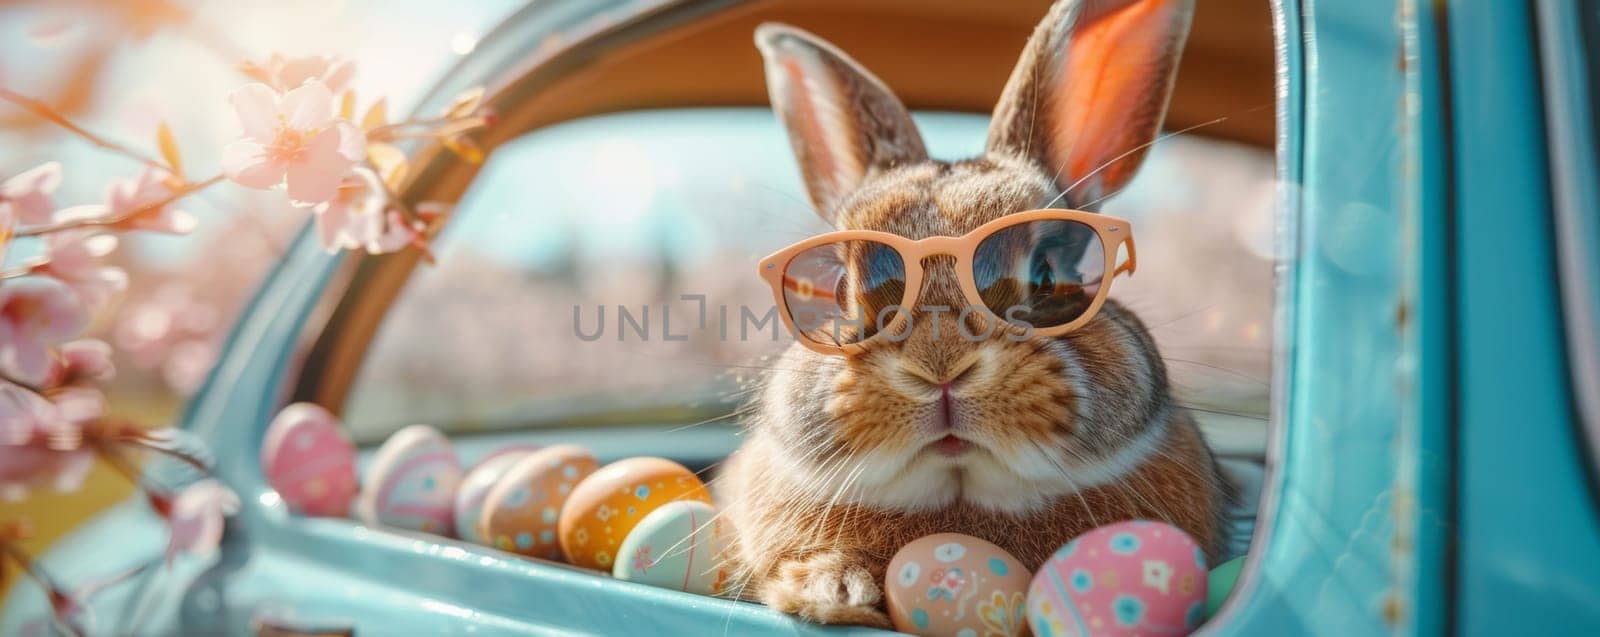 A rabbit wearing sunglasses sits in a car with a bunch of Easter eggs. The scene is playful and lighthearted, with the rabbit looking out the window and enjoying the view